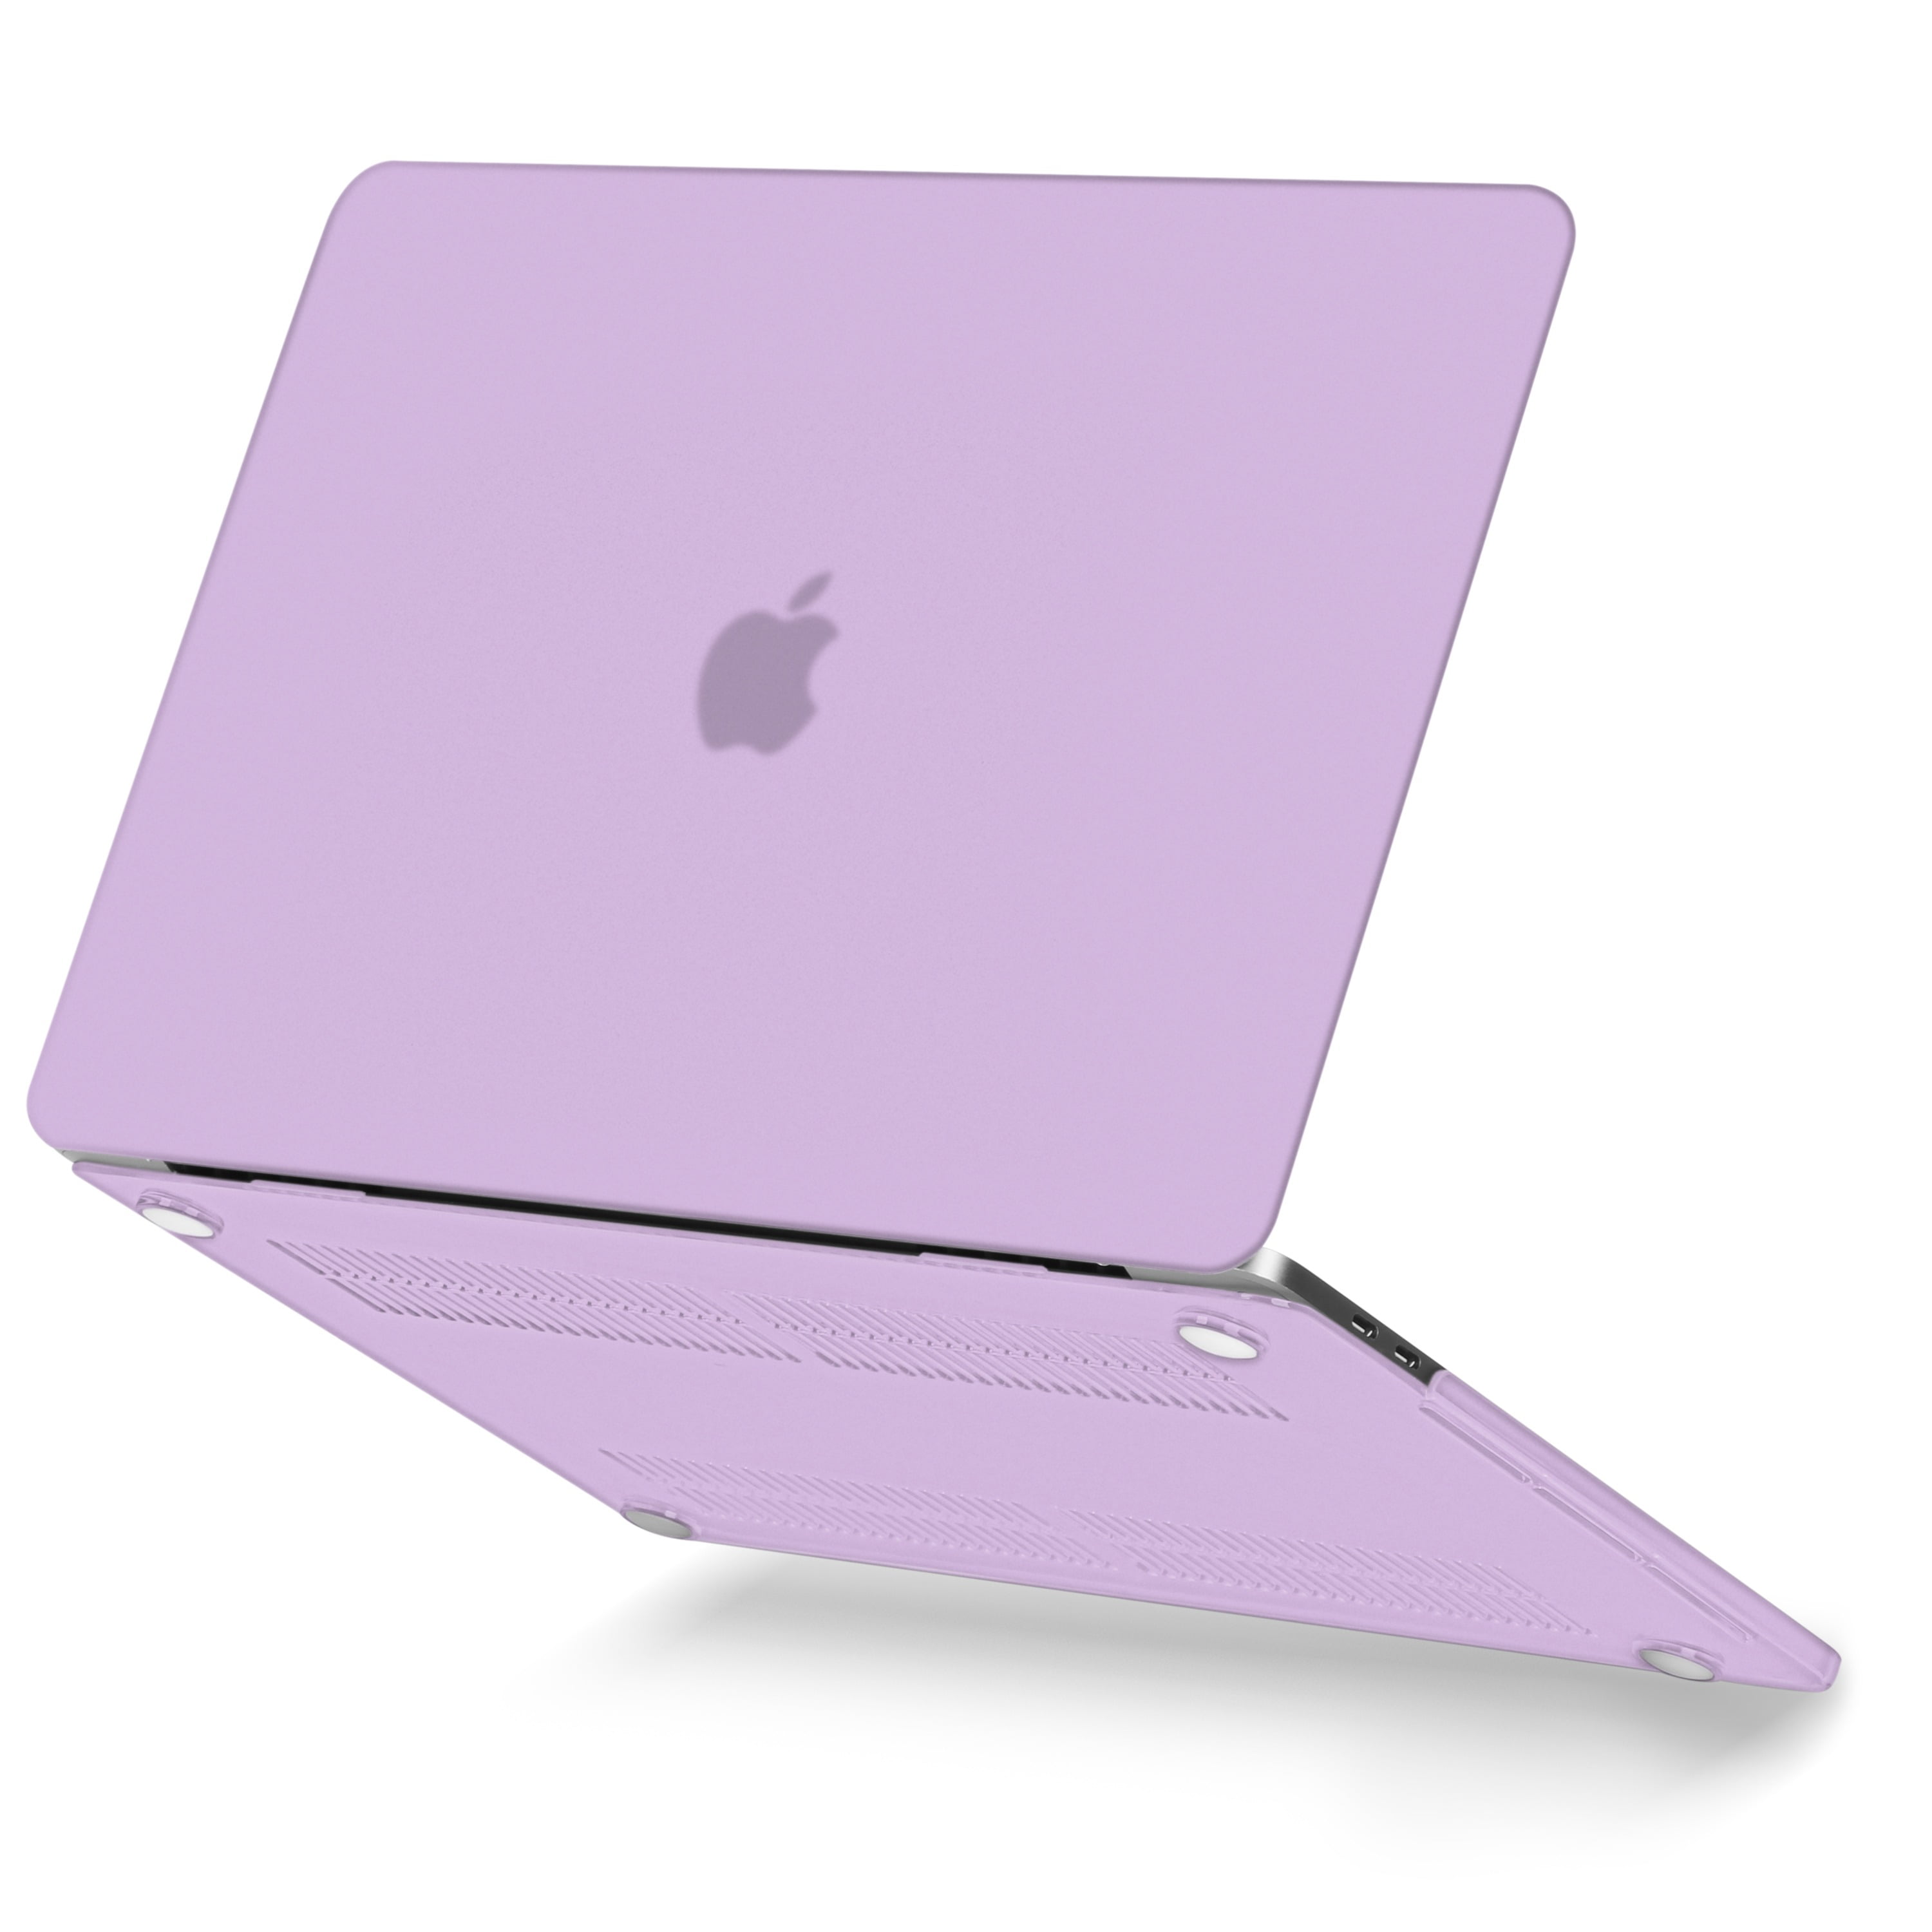 DEEP PURPLE Rubberized Hard Case for Macbook Pro 13" A1425 with Retina display 